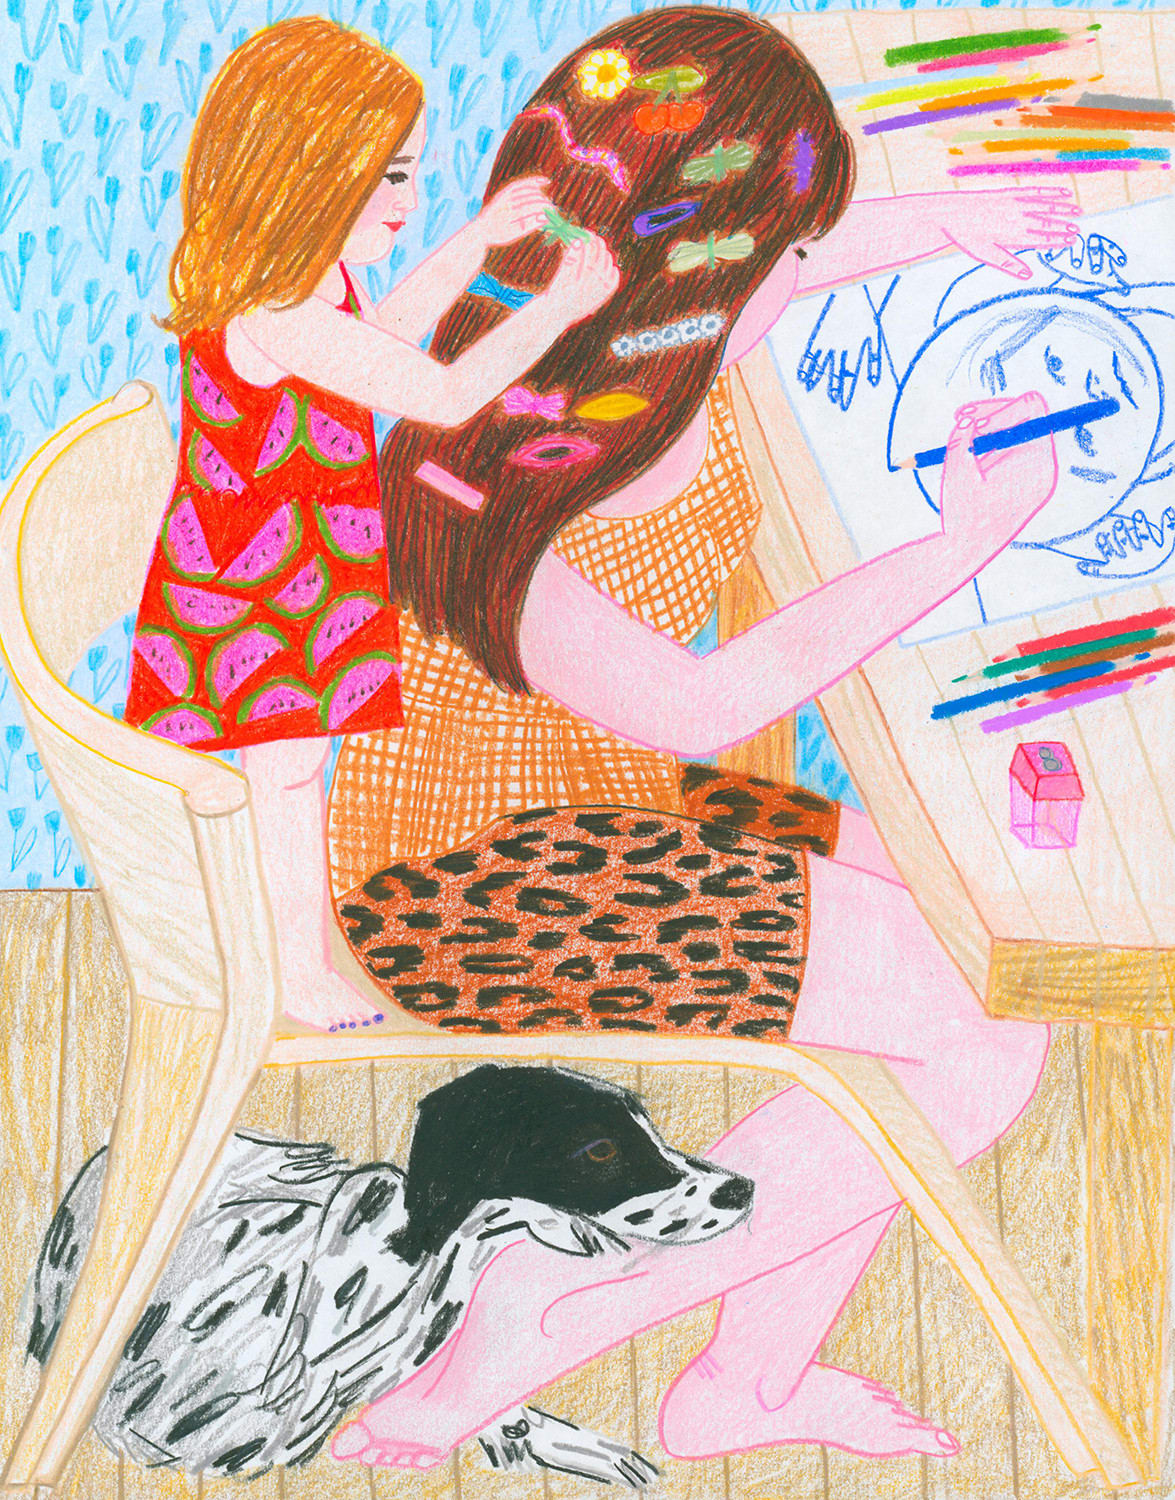 Drawing of the artist seated at a woodDrawing of the artist seated at a wooden desk making a drawing of a child with a blue pencil, while her daughter, who is wearing a bright watermelon patterned dress, applies an assortment of colorful barrettes to her mother’s hair. A black and white spotted dog lays underneath their chair and rests its head on mother’s foot.en desk making a drawing of a child with a blue pencil, while her daughter, who is wearing a bright watermelon patterned dress, applies an assortment of colorful barrettes to her mother’s hair. A black and white spotted dog lays underneath their chair and rests its head on mother’s foot.